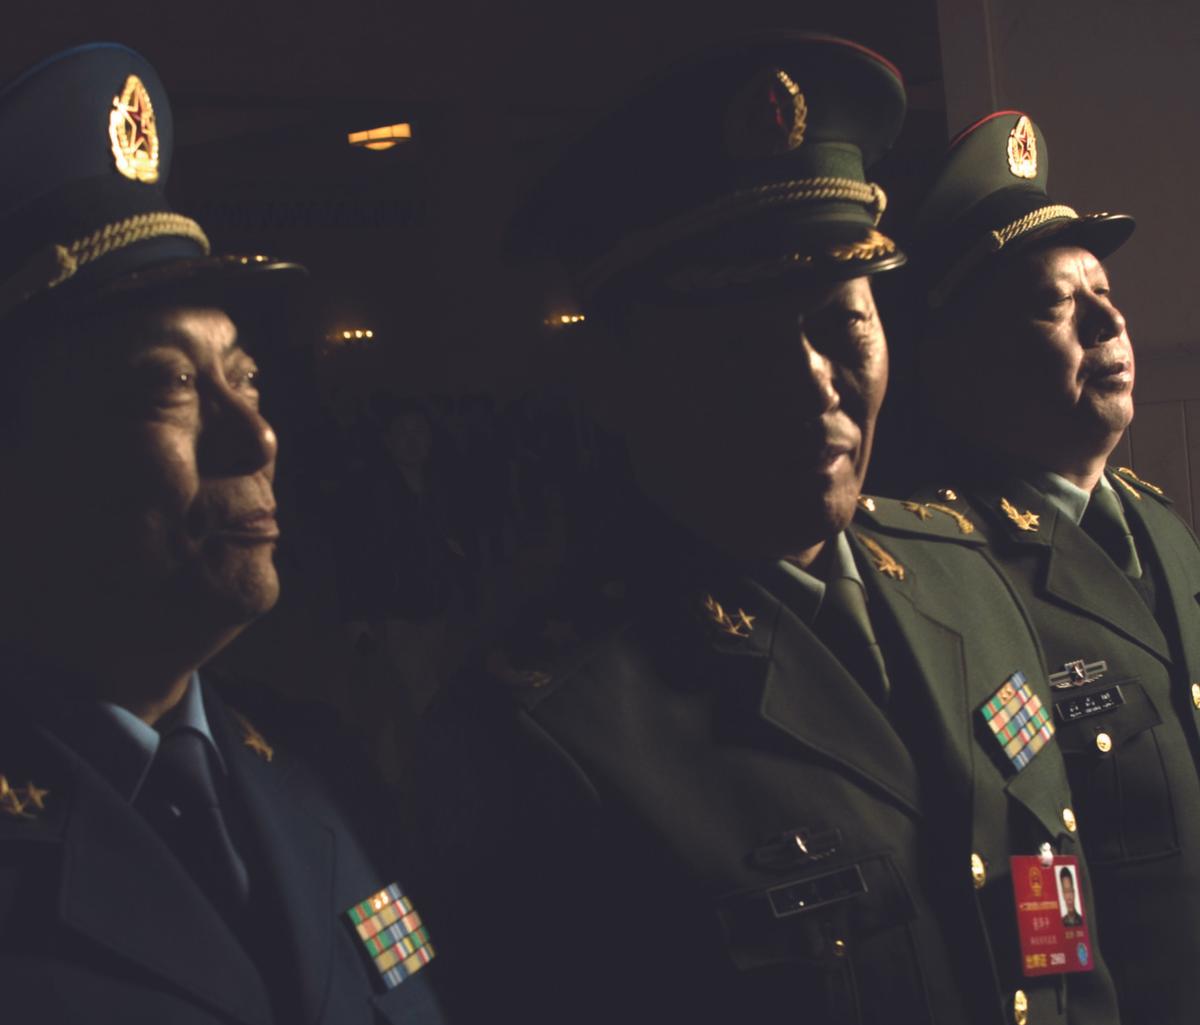 Military delegates leave after the 2nd plenary session of the National People’s Congress in Beijing on March 9, 2016. (FRED DUFOUR/AFP/GETTY IMAGES)